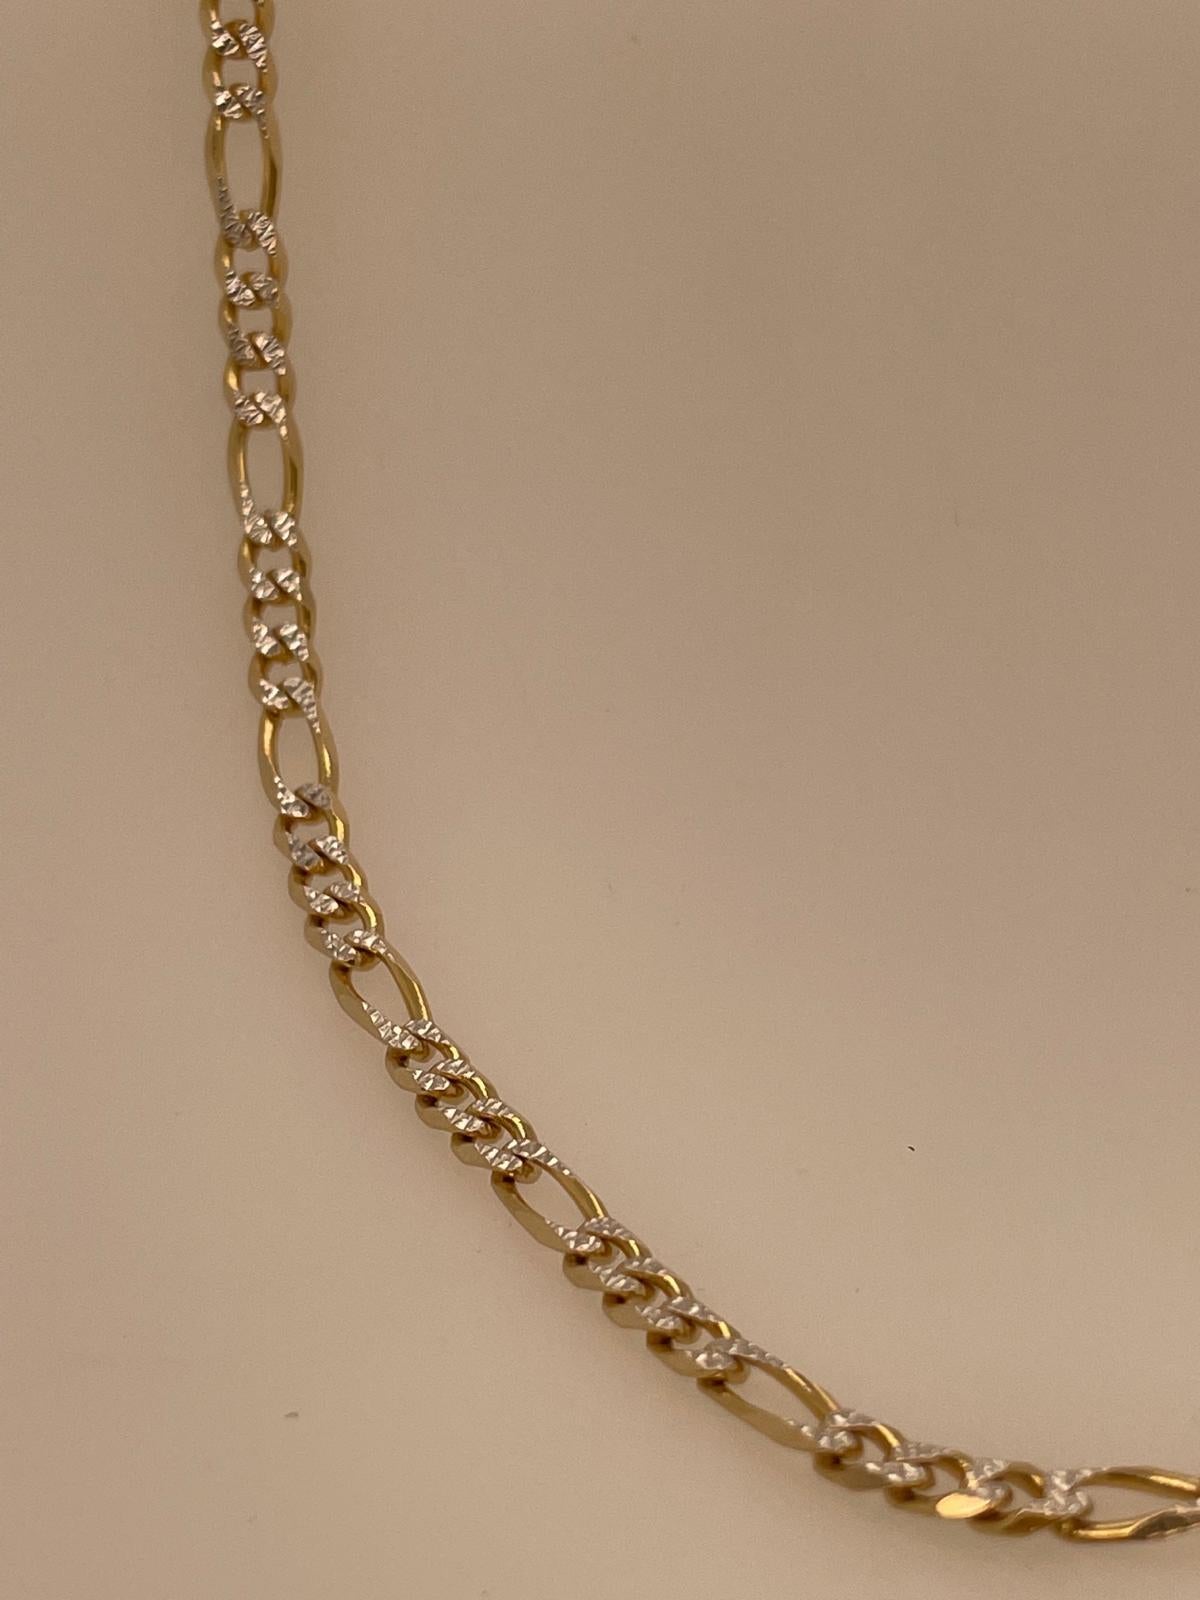 18k yellow gold curb link style chain with white gold detail  10